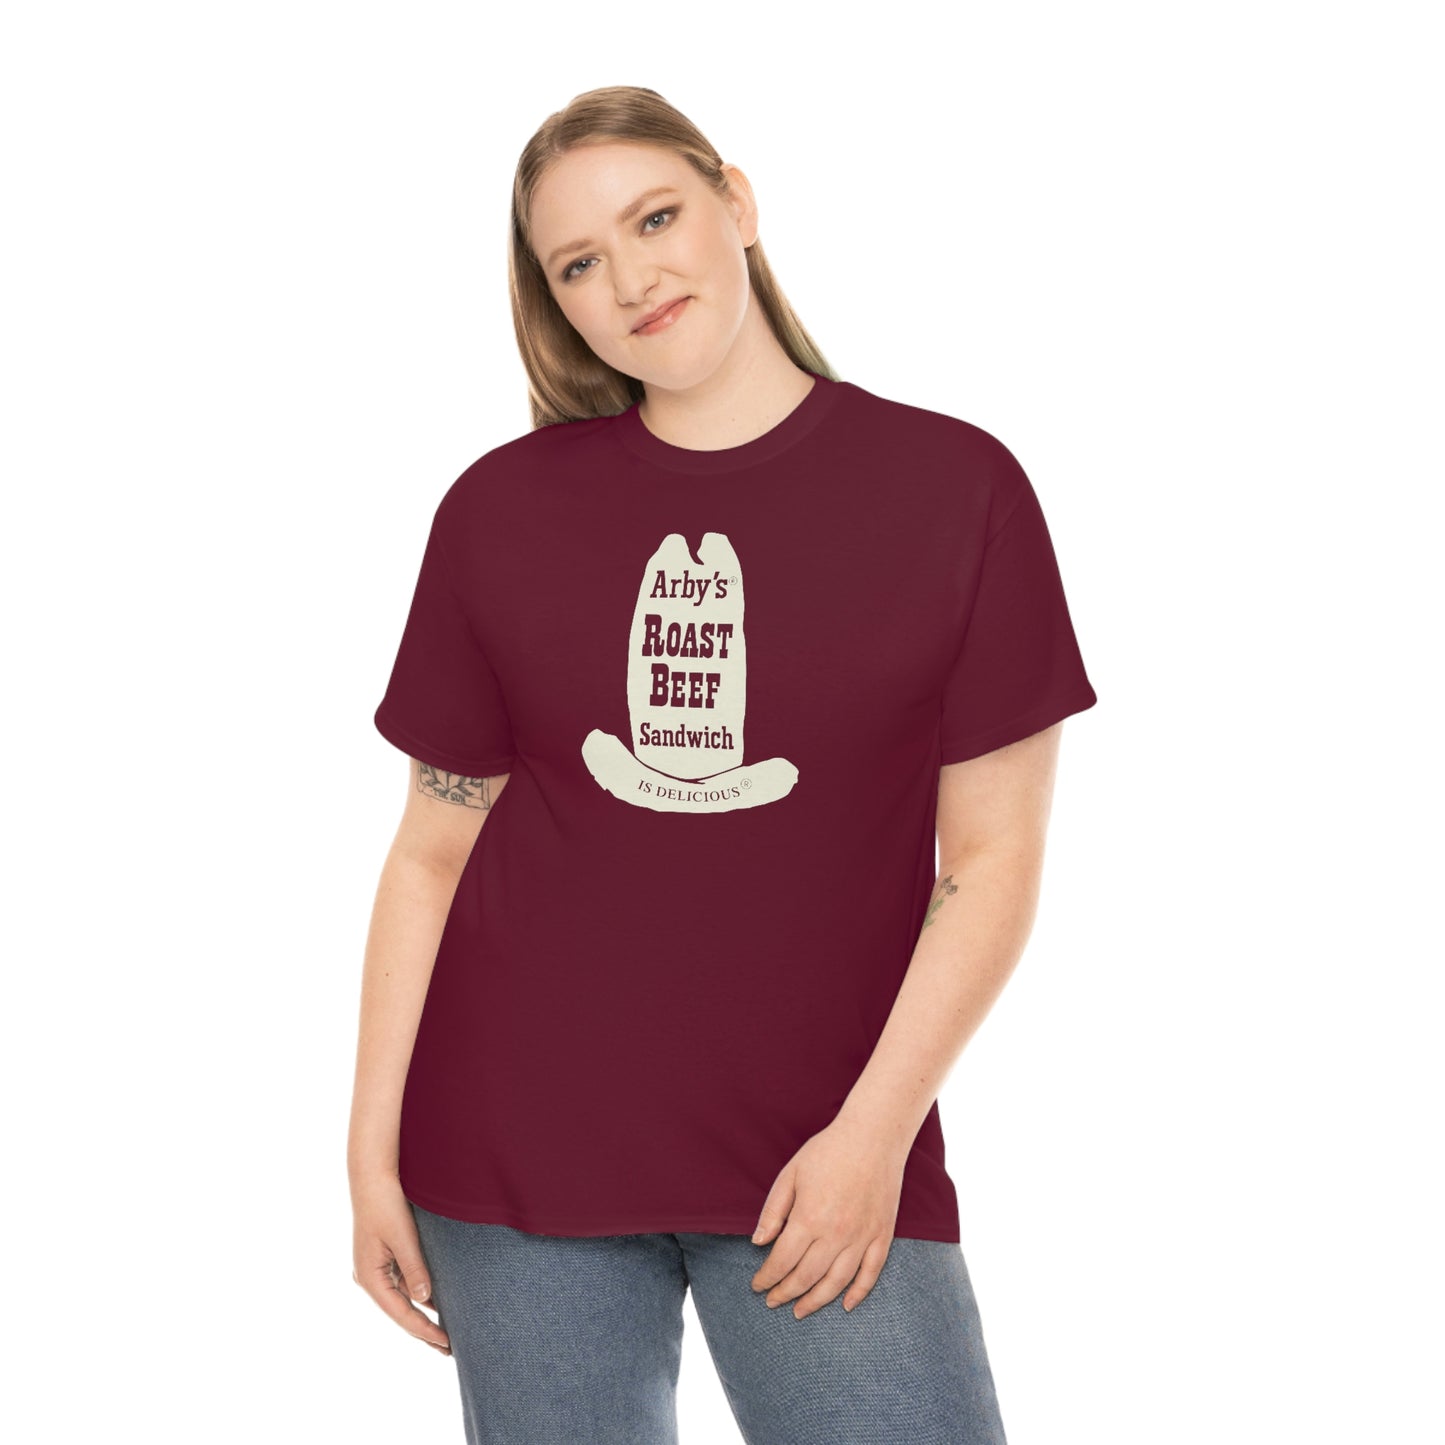 Arby's T-Shirt